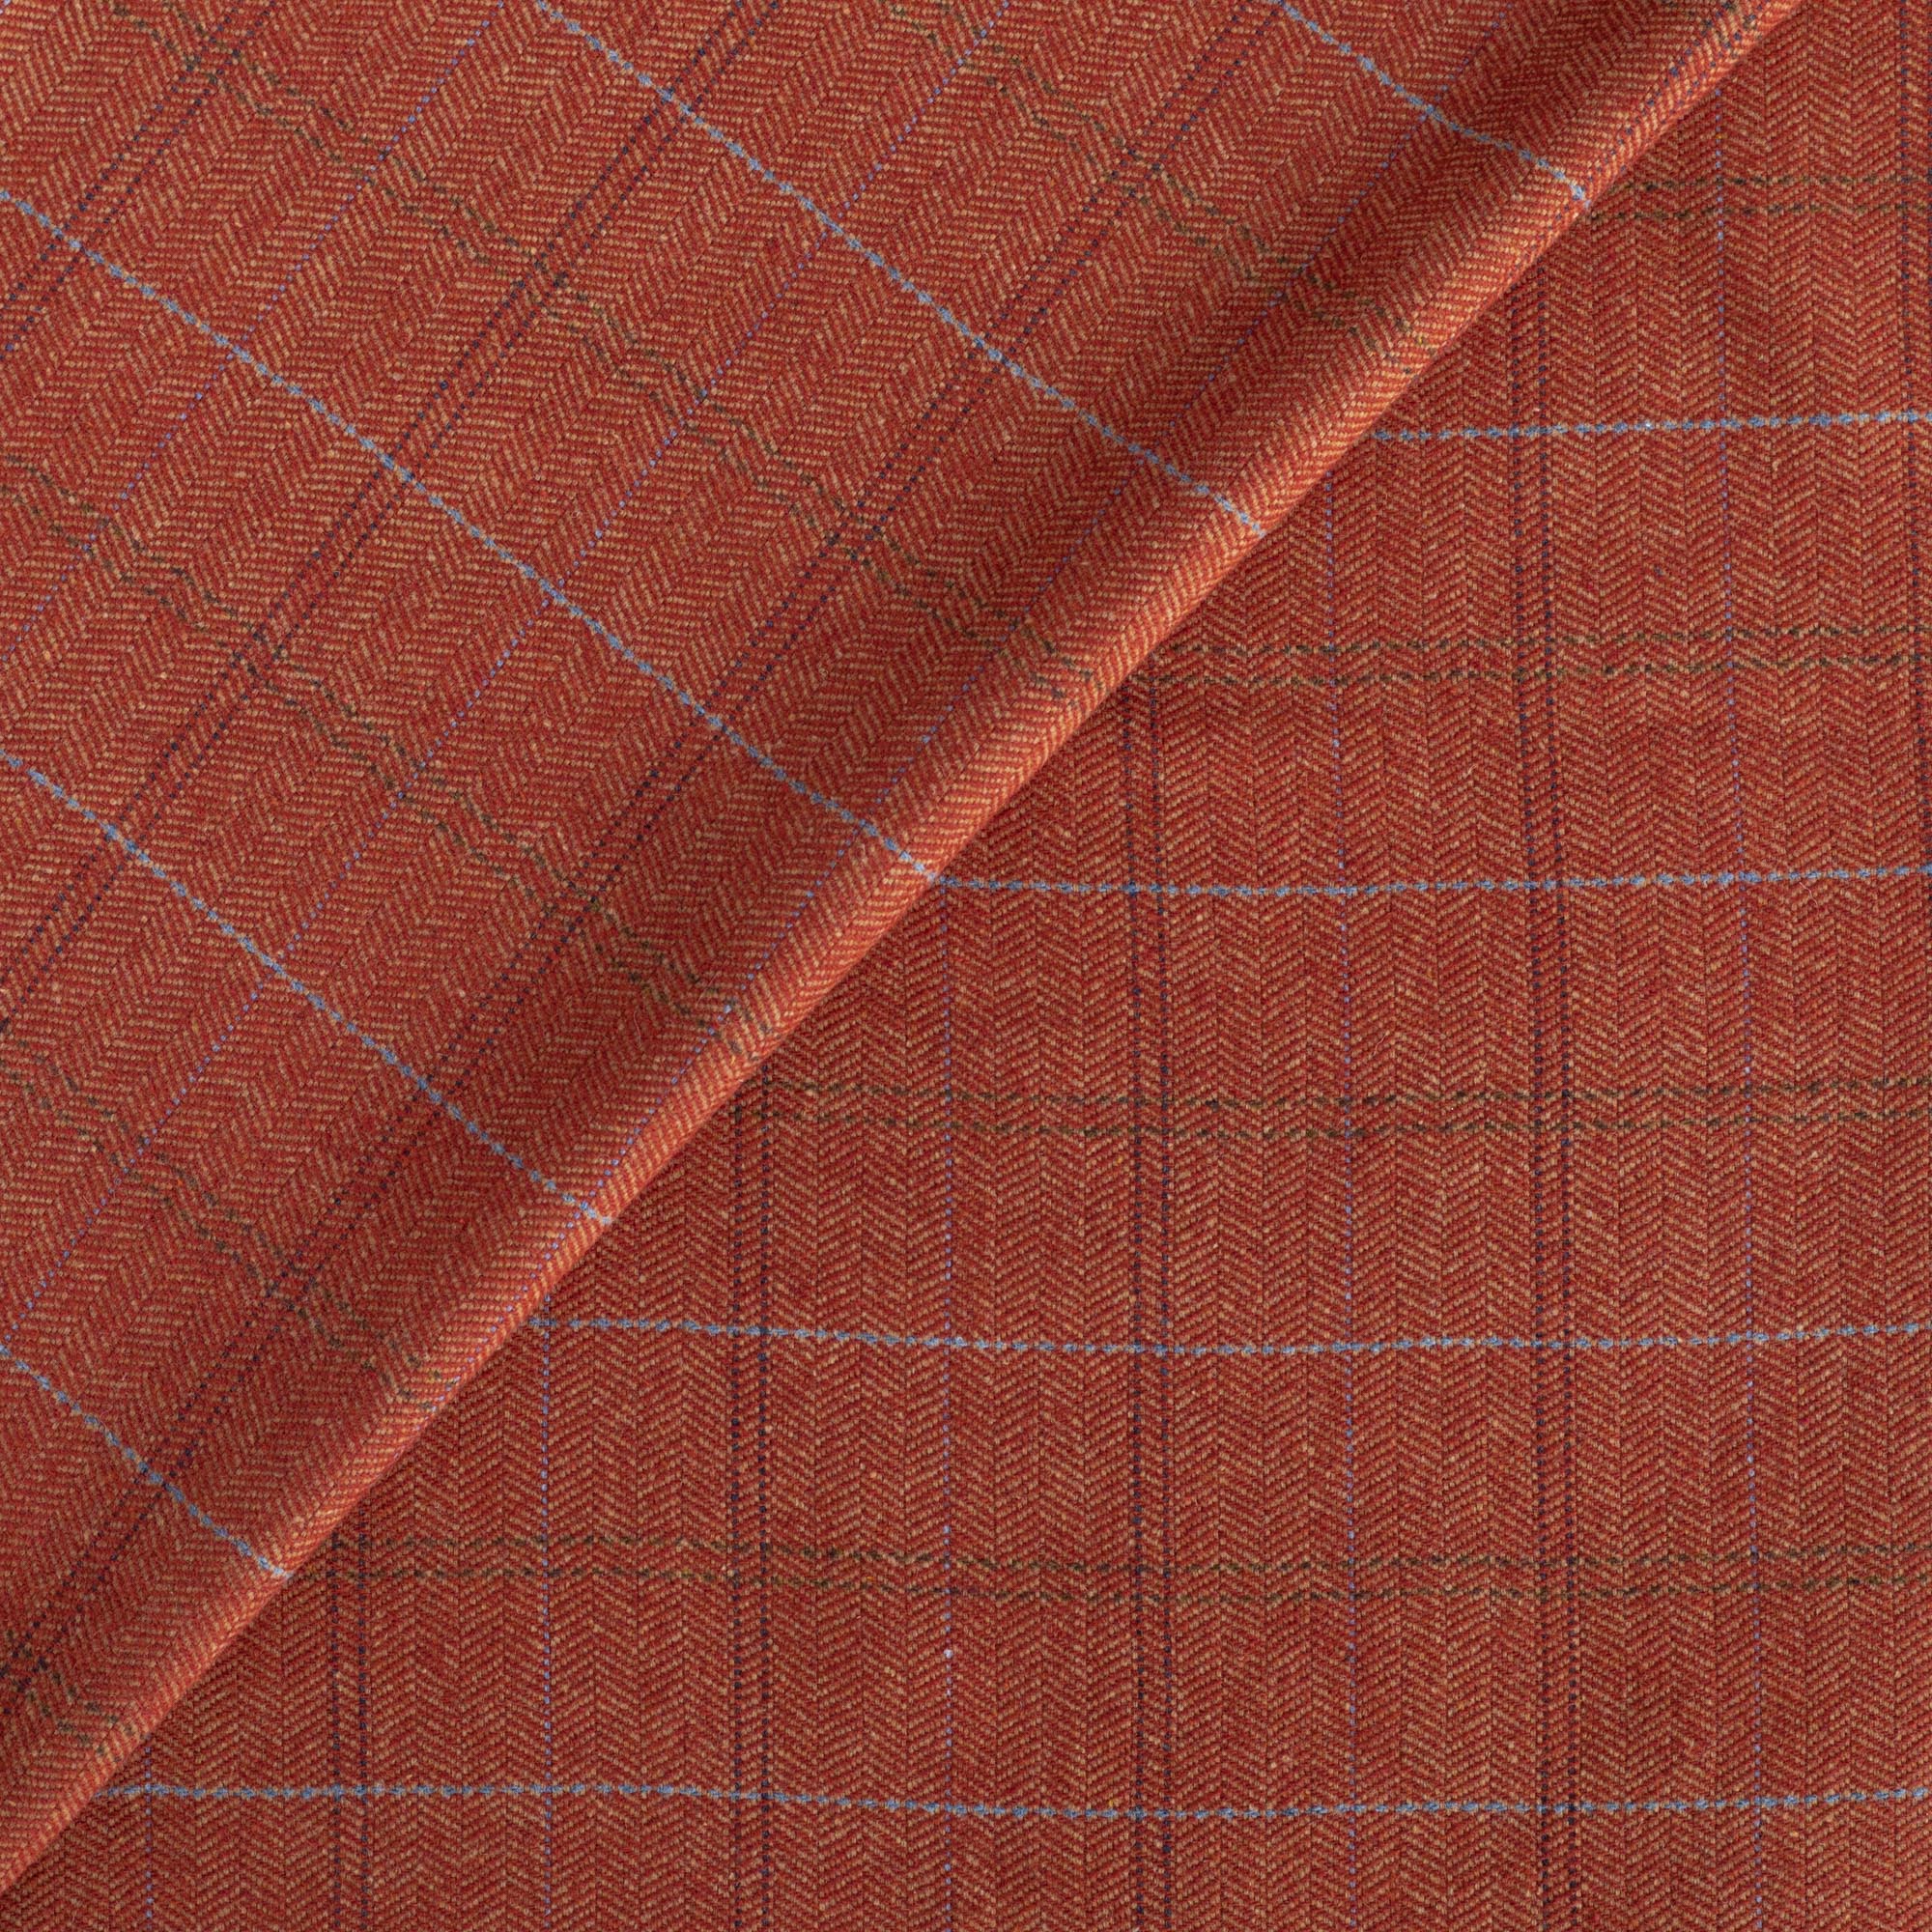 Lundie Plaid Cayenne, a rust red, wool blend plaid home decor fabric from Tonic Living